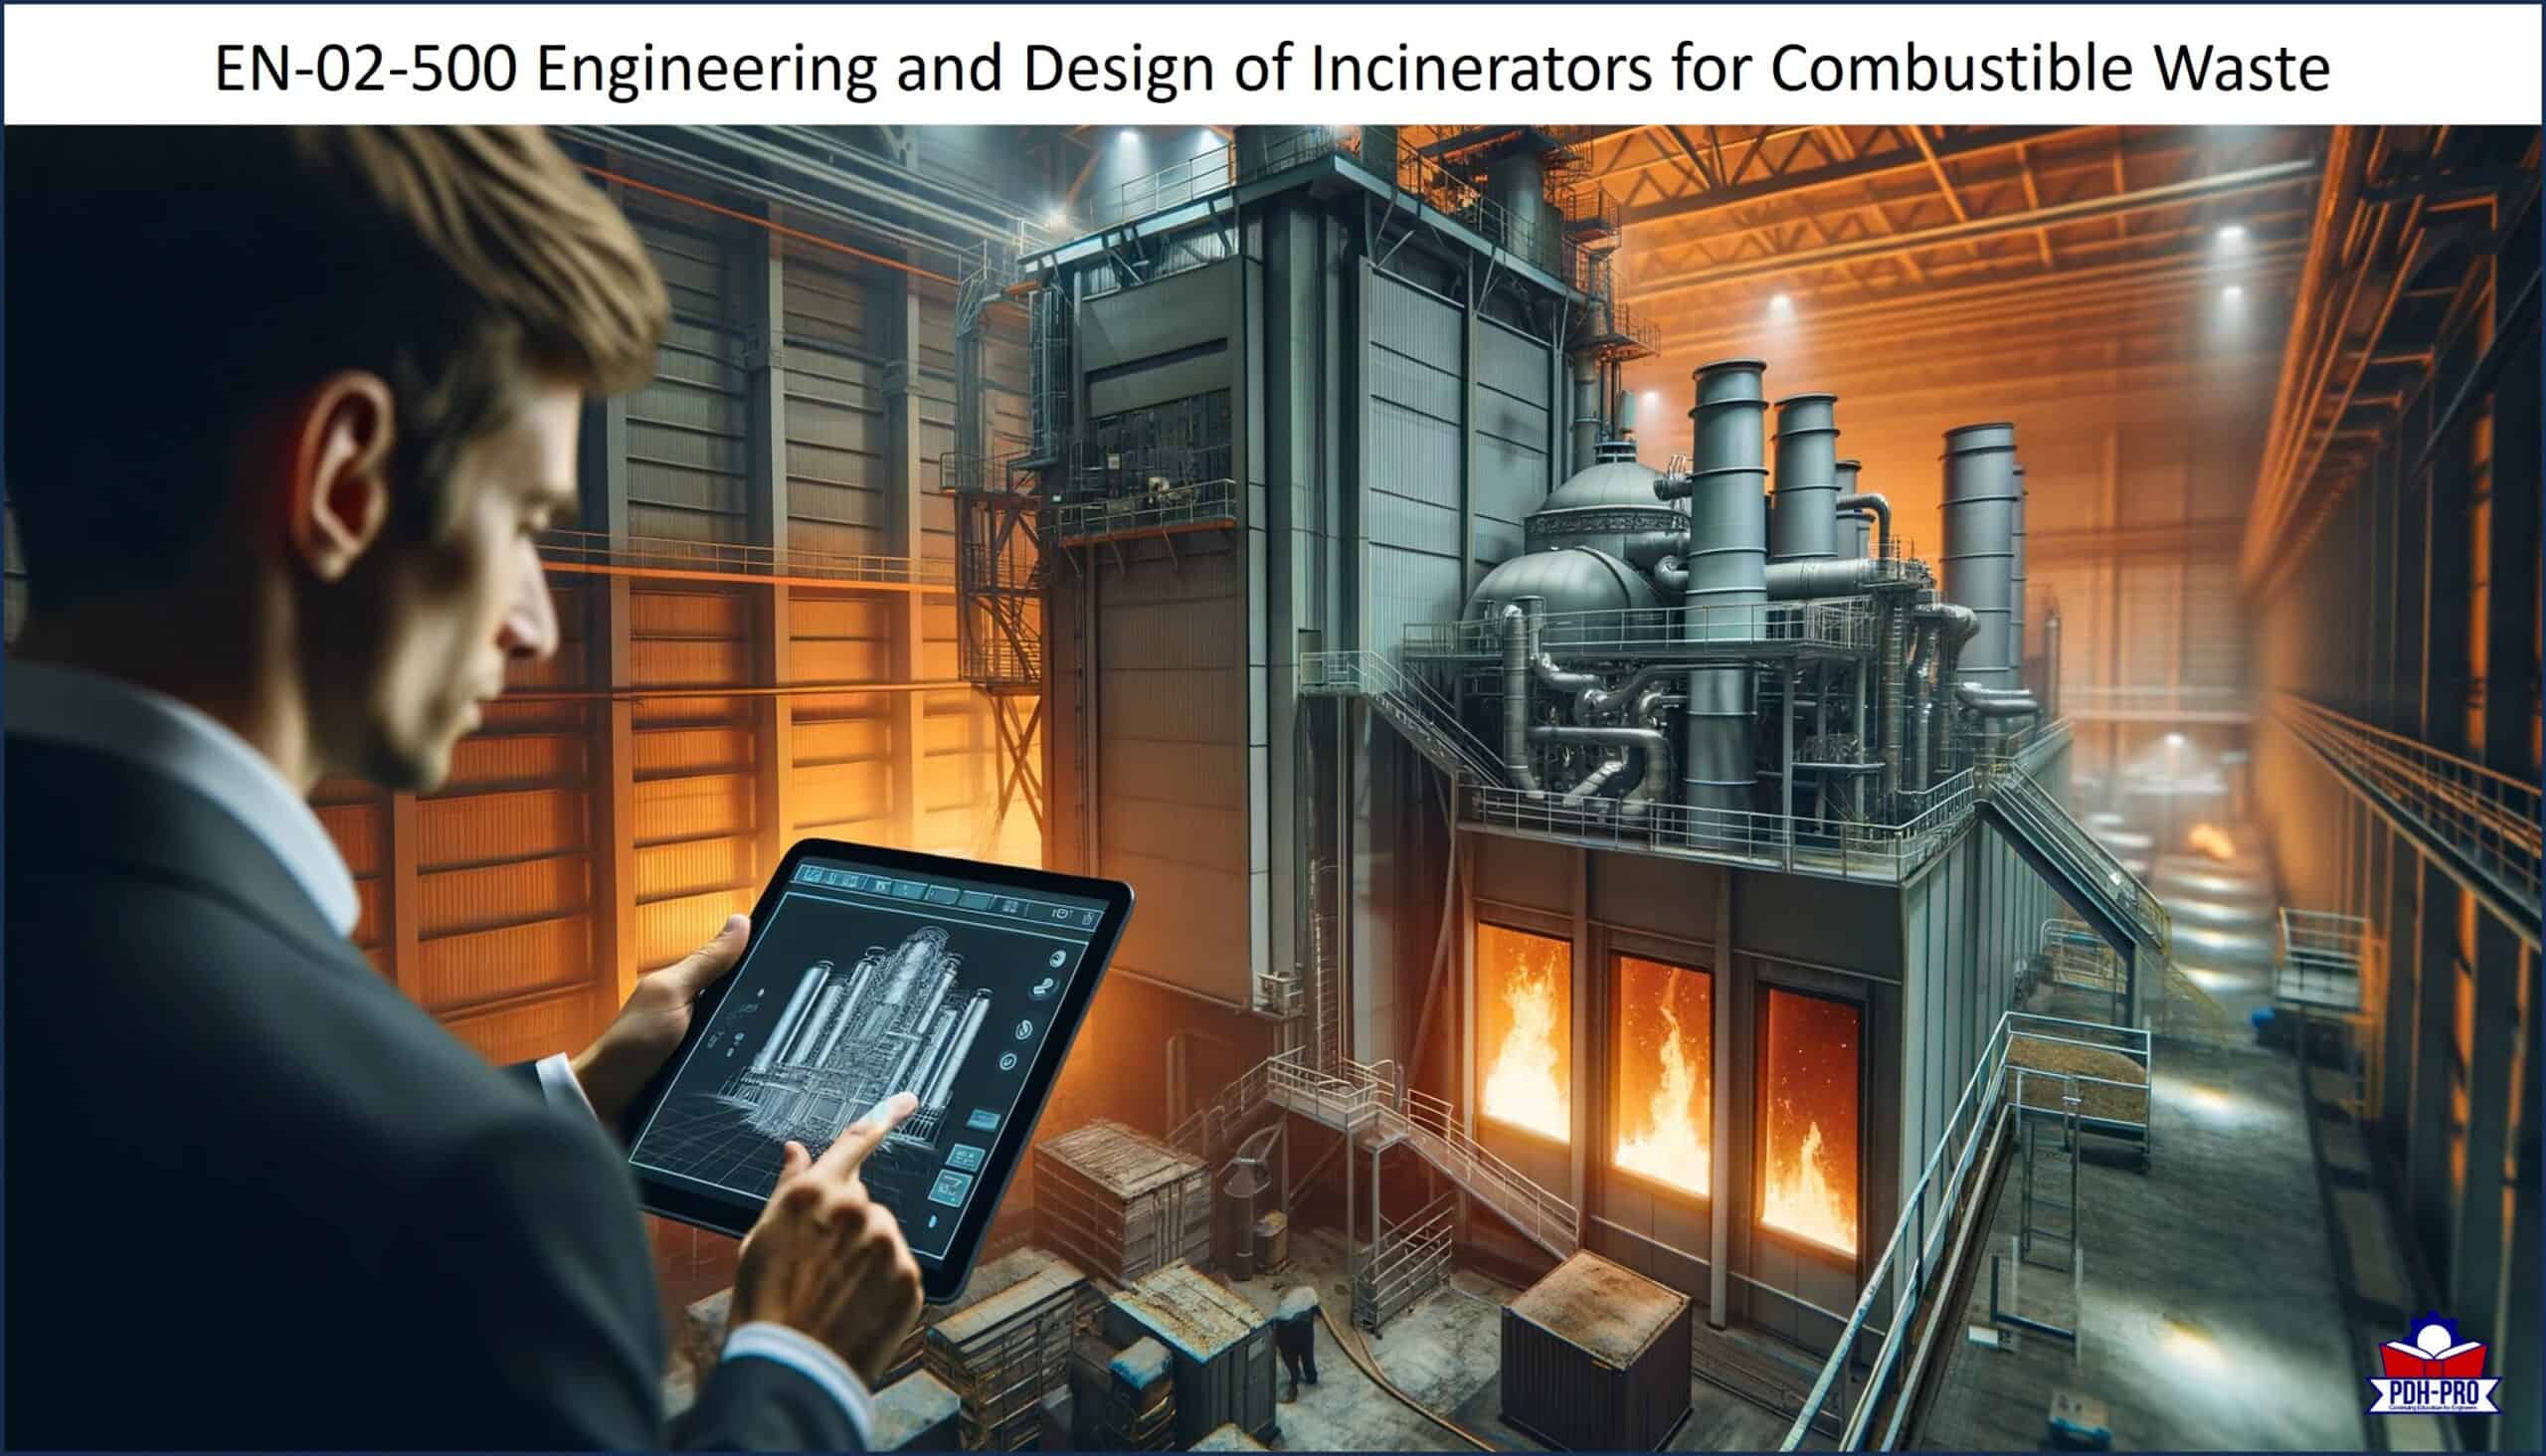 Engineering and Design of Incinerators for Combustible Waste